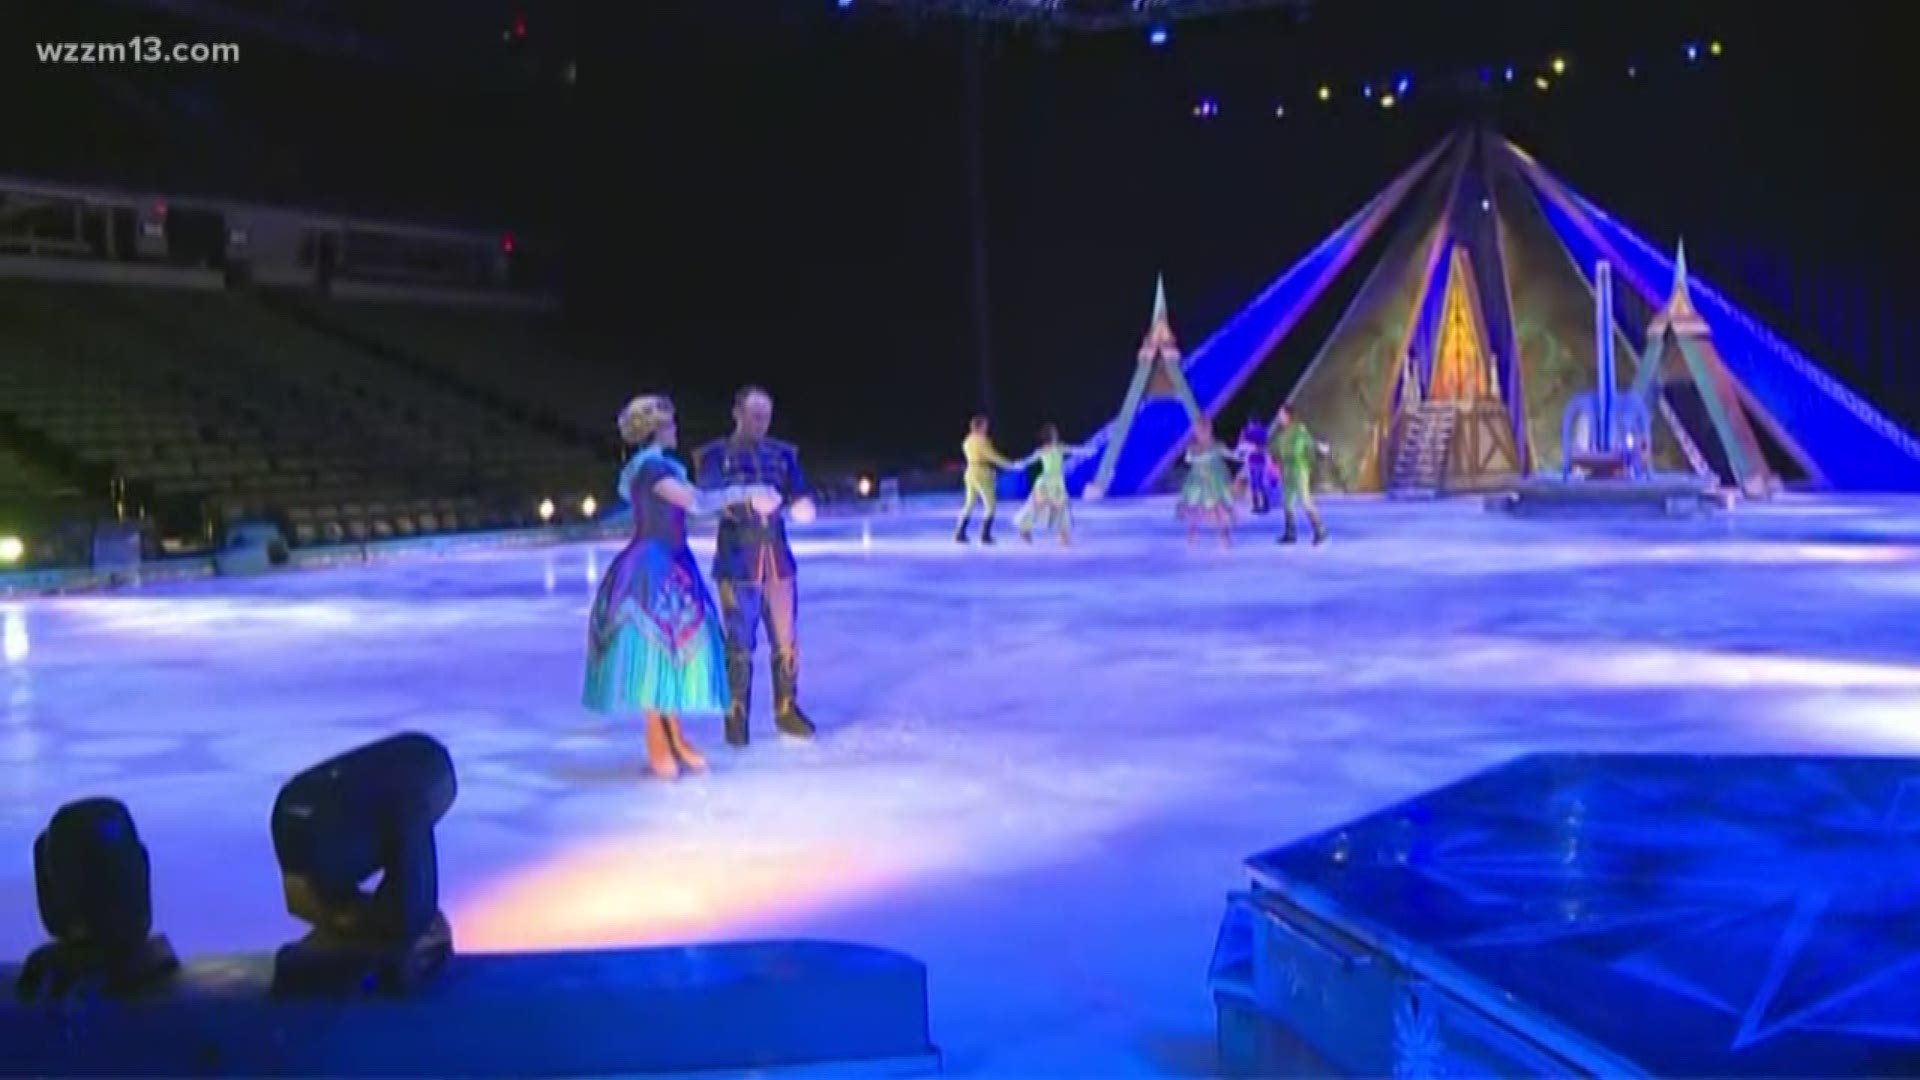 One of Disney's most beloved movie comes to life in Grand Rapids -- "Disney on Ice: Frozen" takes over Van Andel Arena.